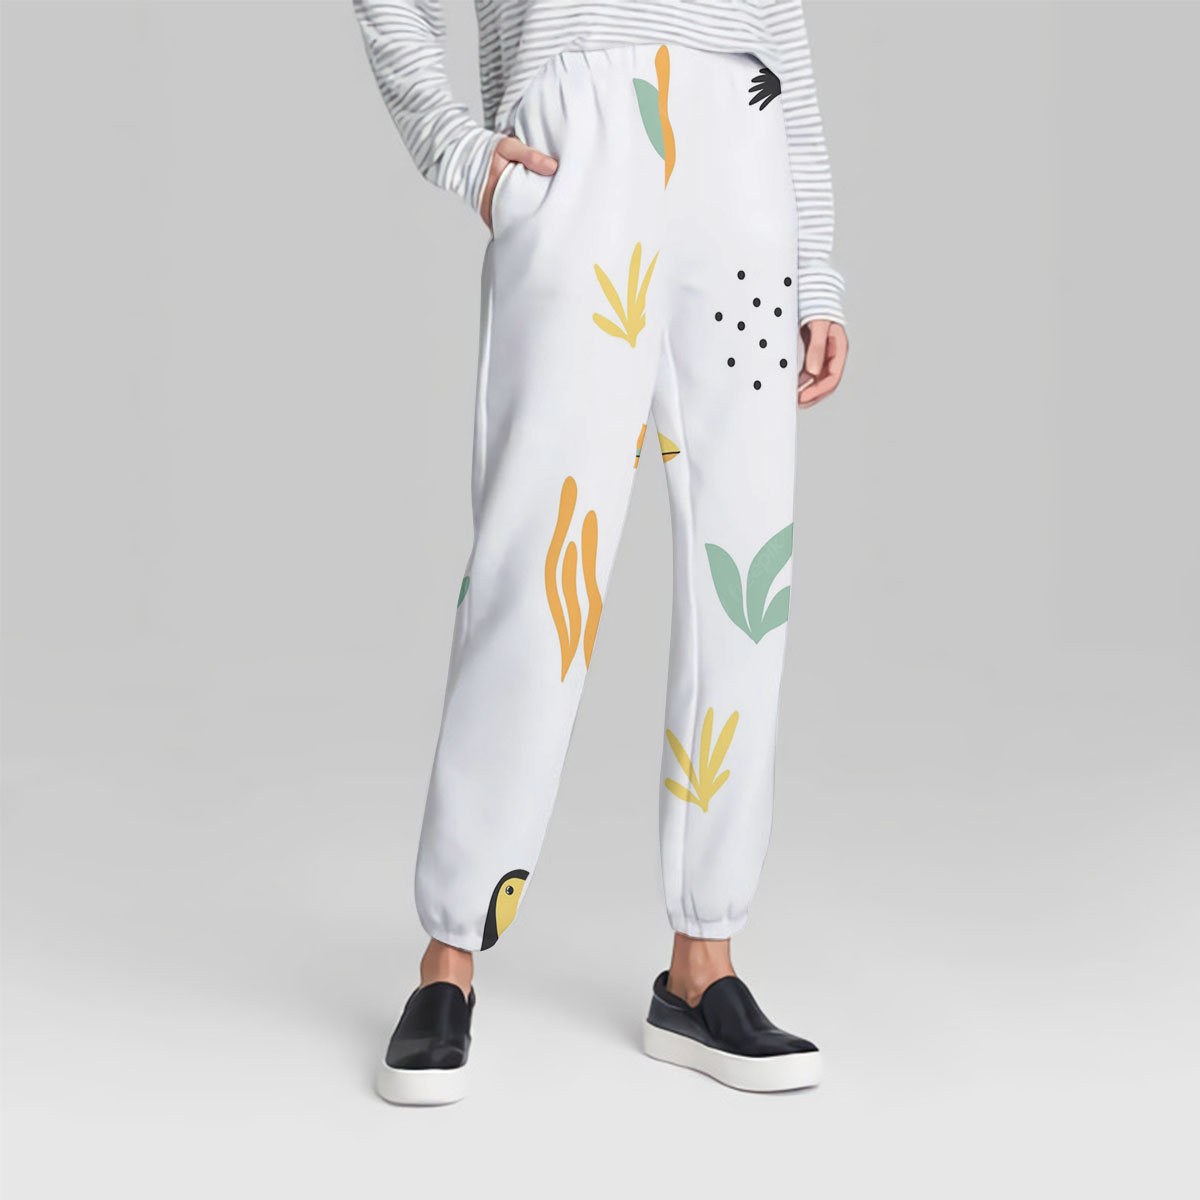 Funny Coon Toucan Sweatpant